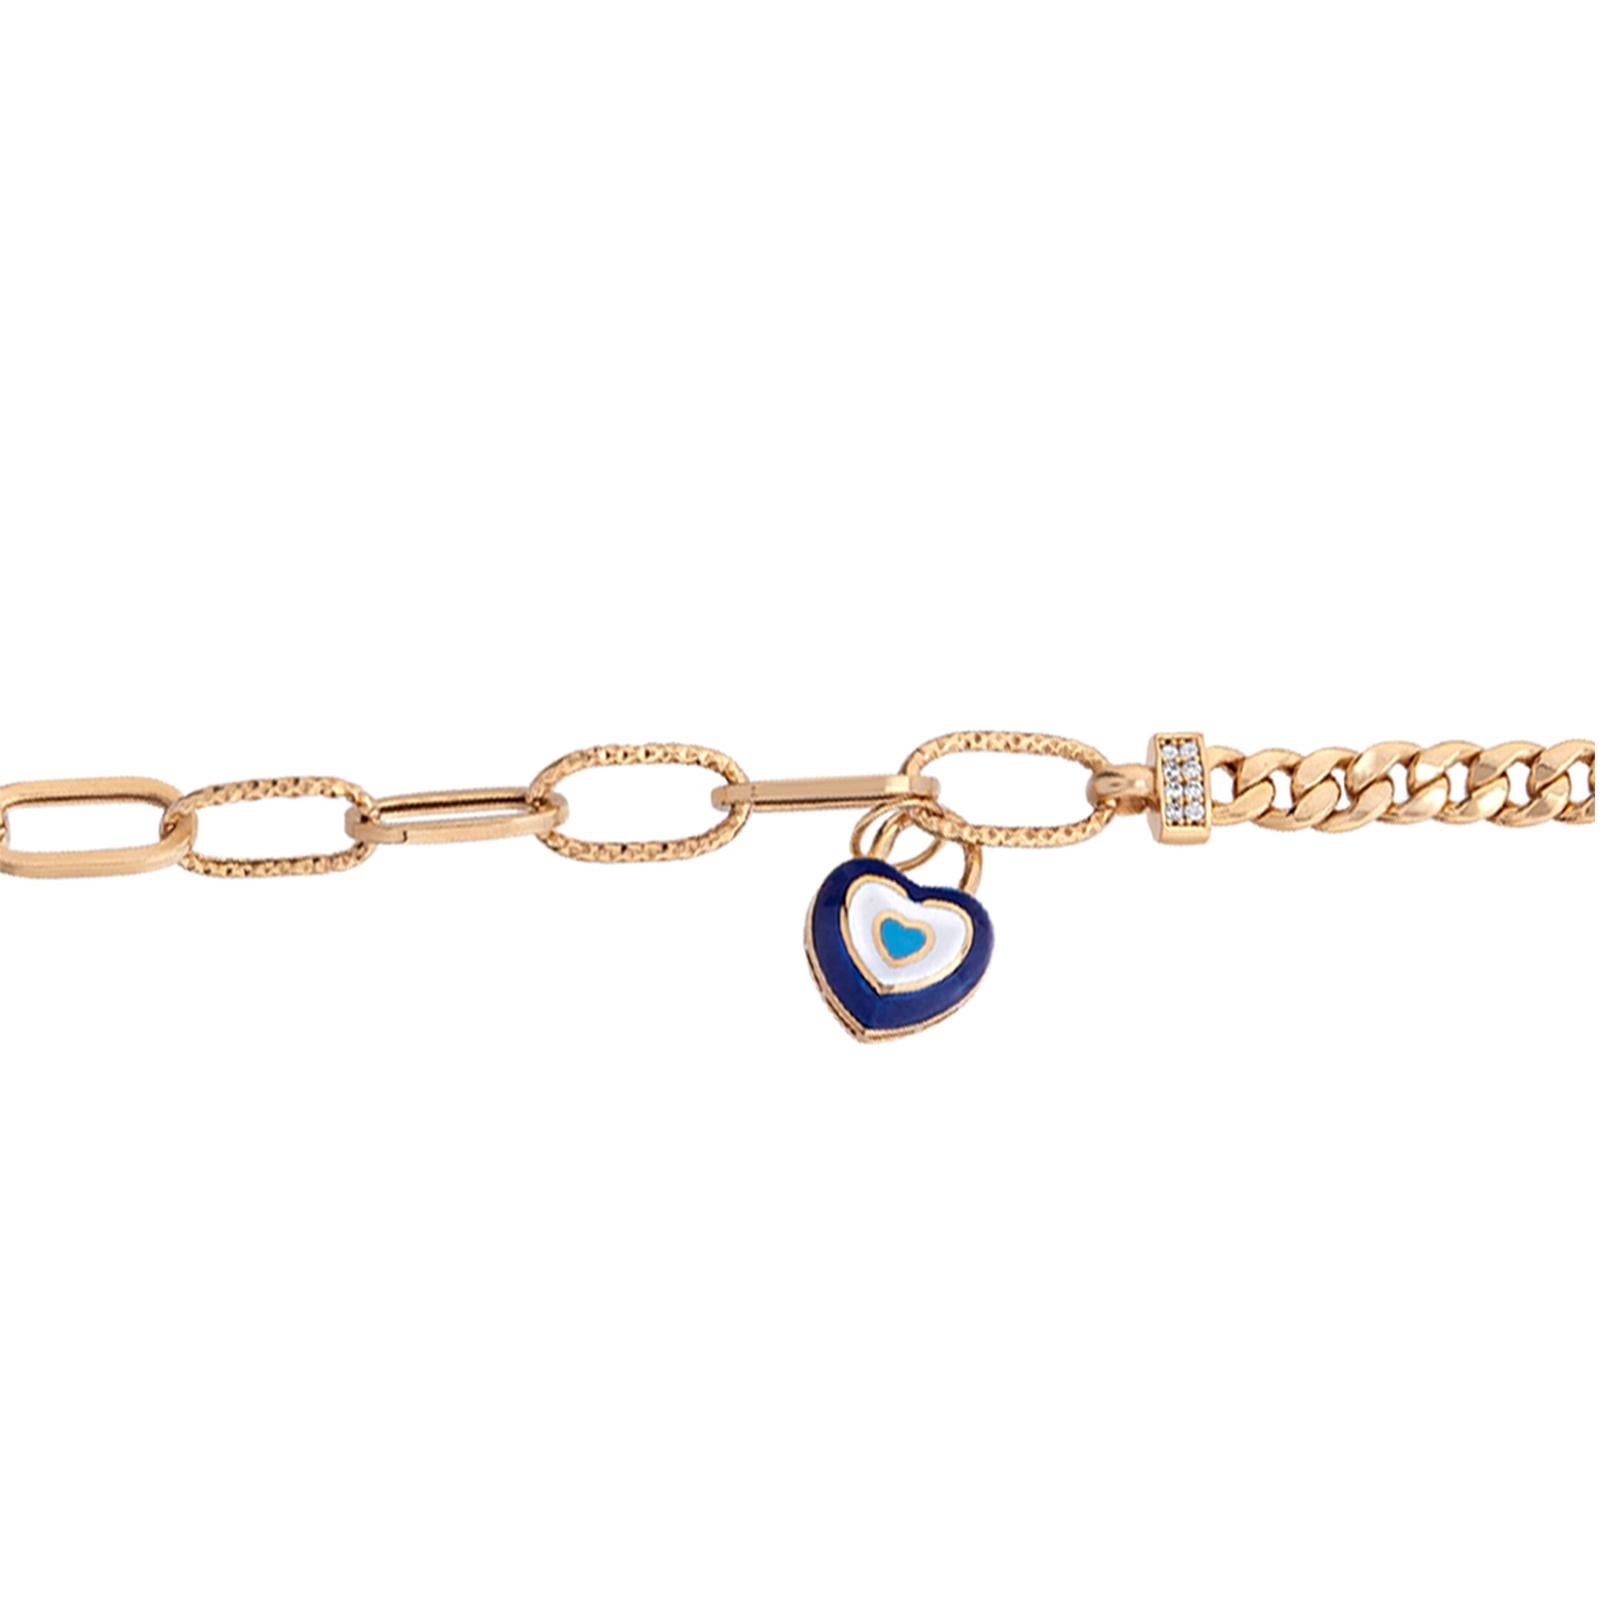 Let There Be Love And Light In Your Life When You Wear This Nazarlique Charm From The Evil Eyes Collection.
Tennis Bracelet with Enamel Heart Charm in 8K Yellow Gold.